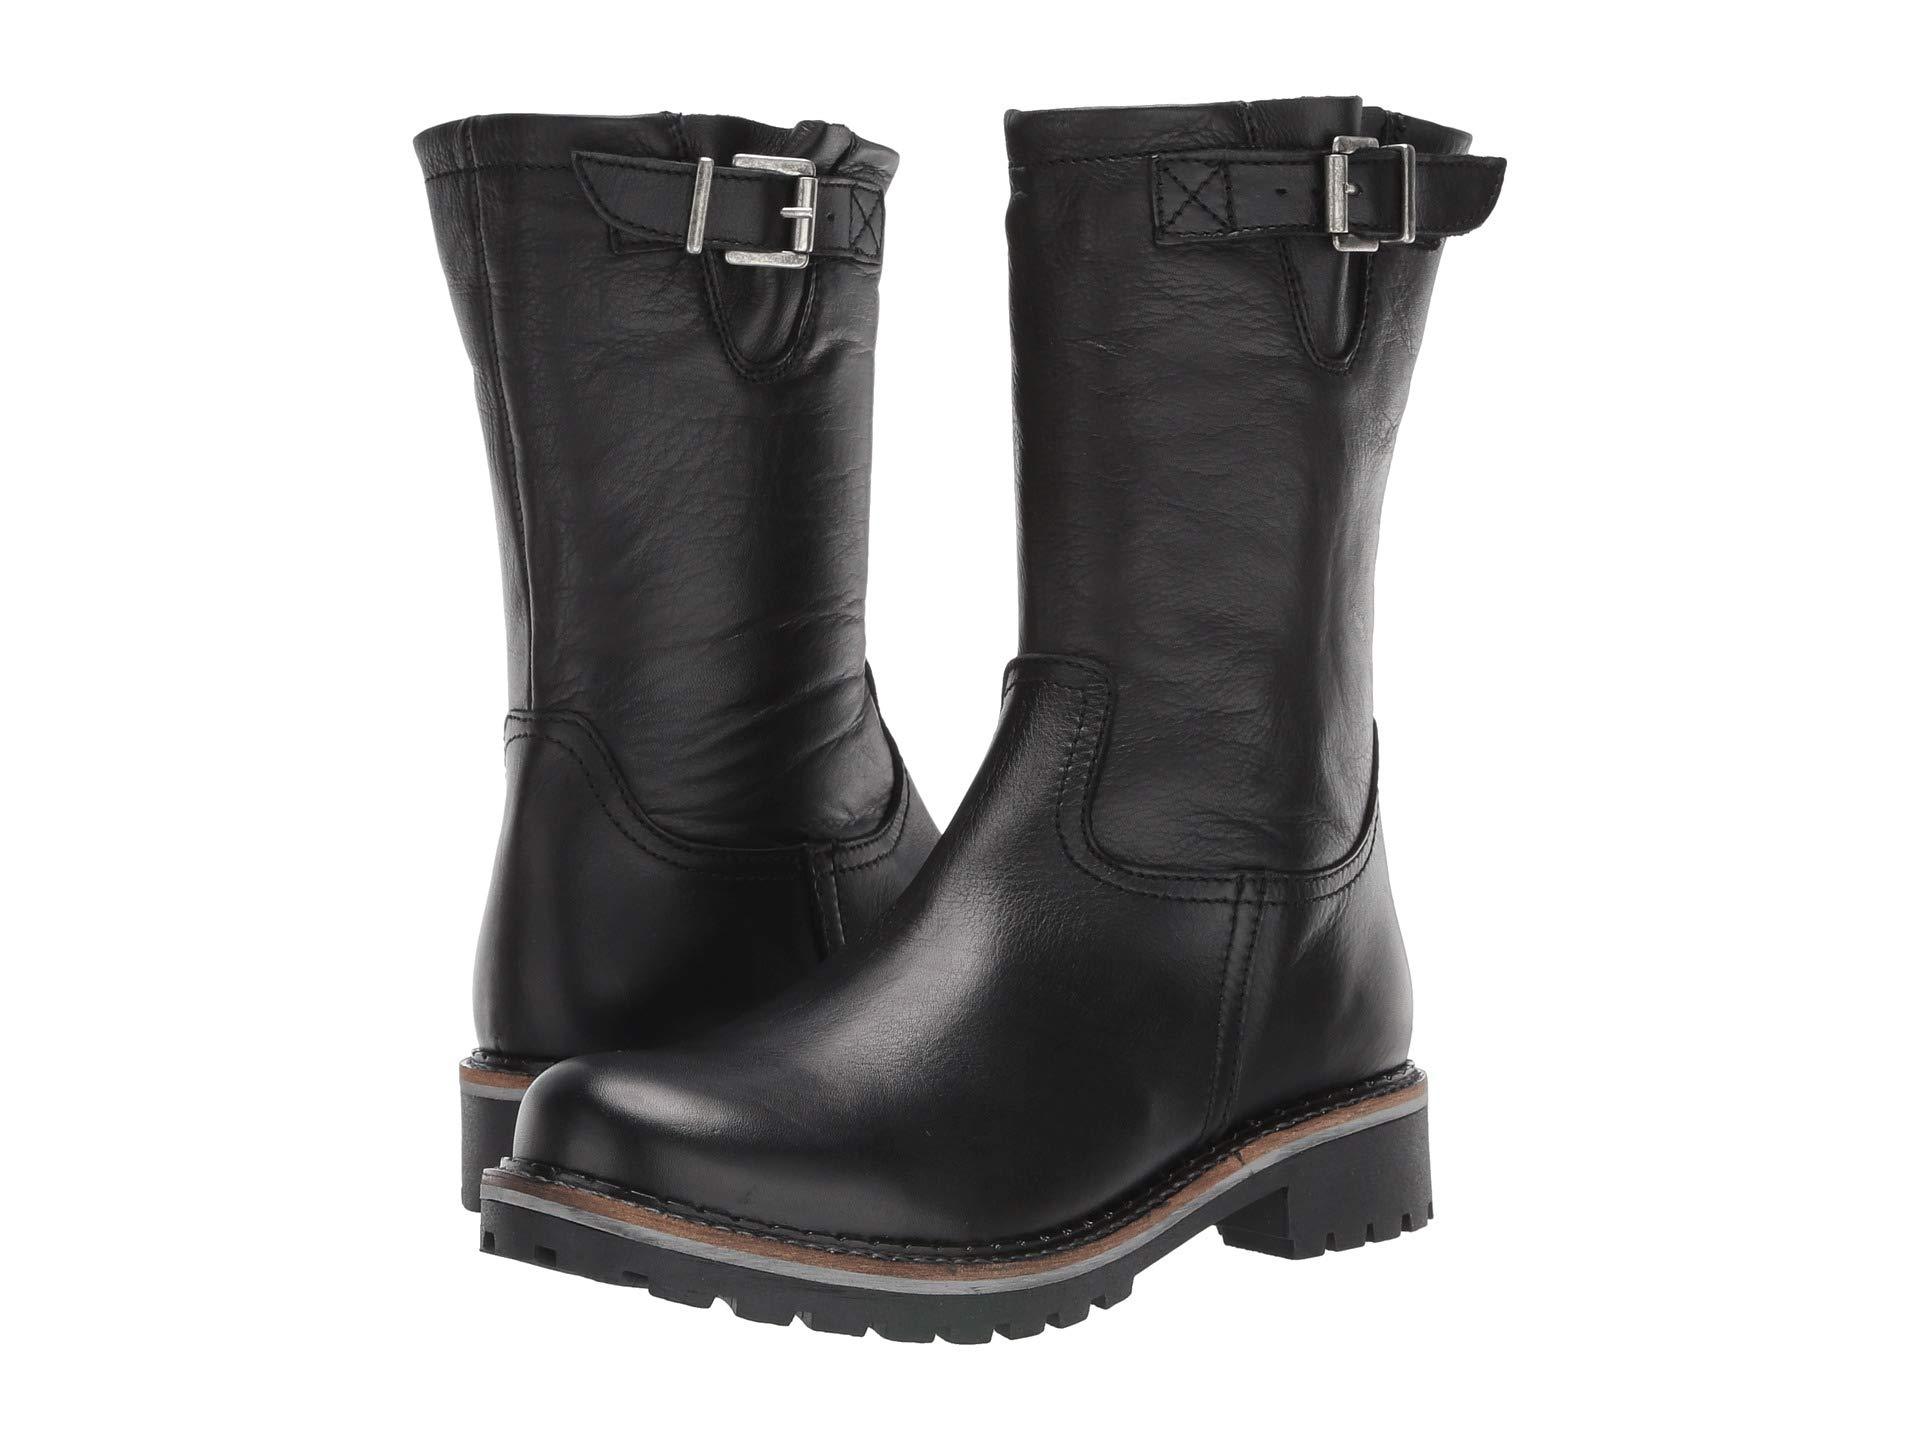 eric michael boots nordstrom